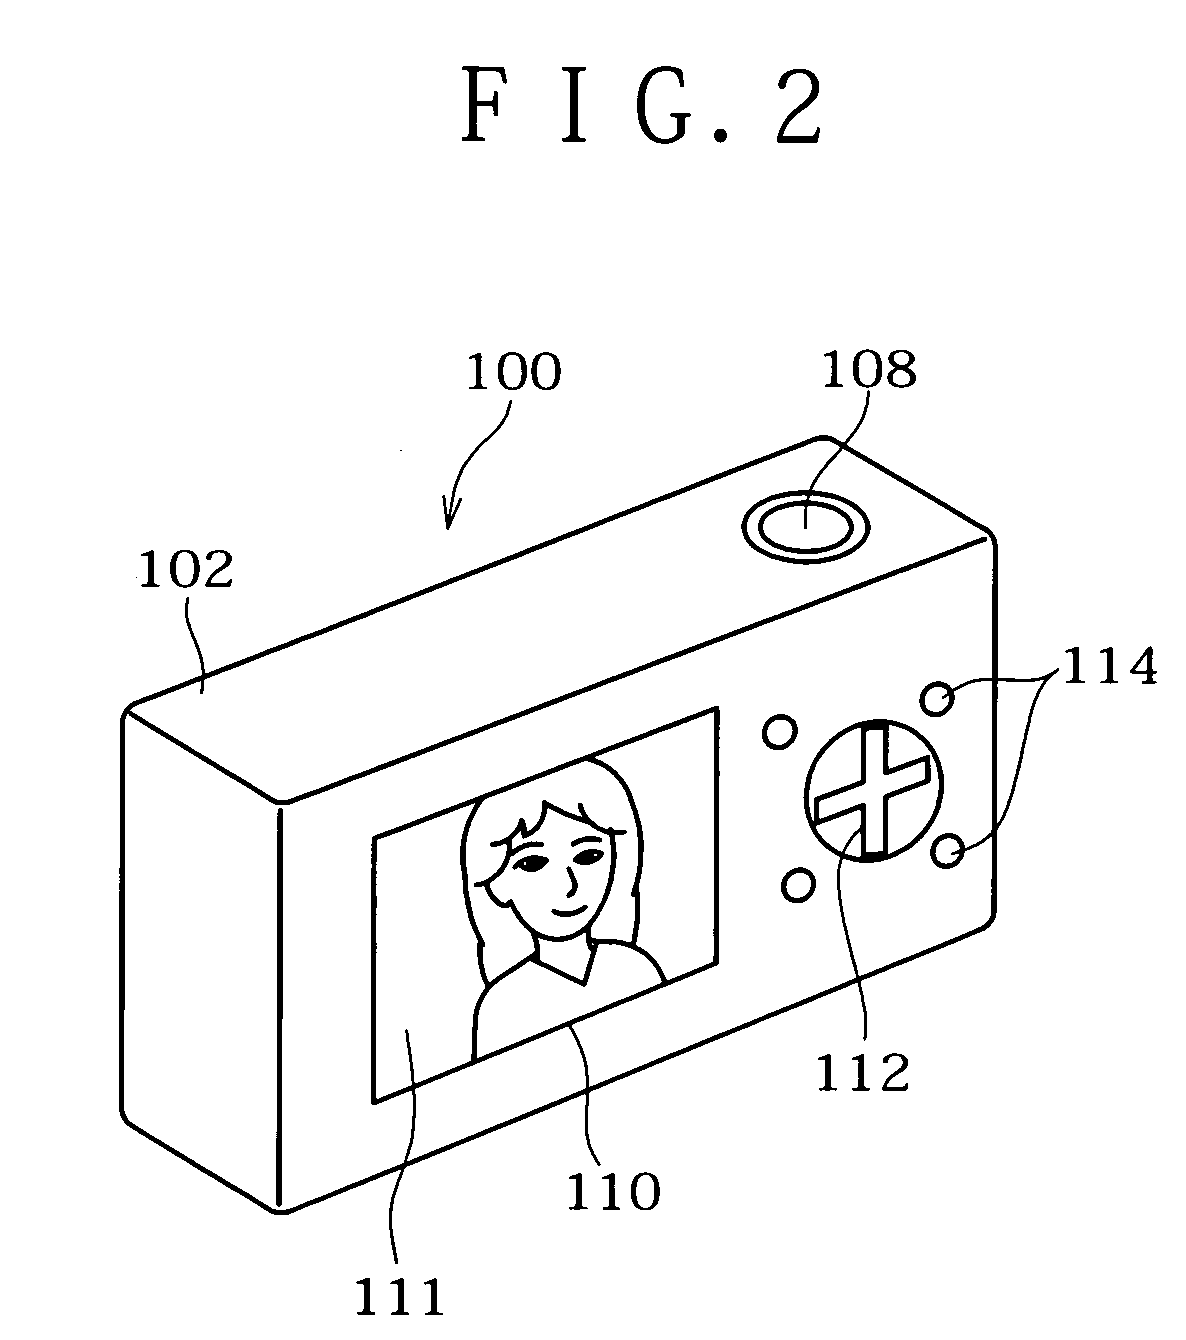 Lens barrel and imaging device